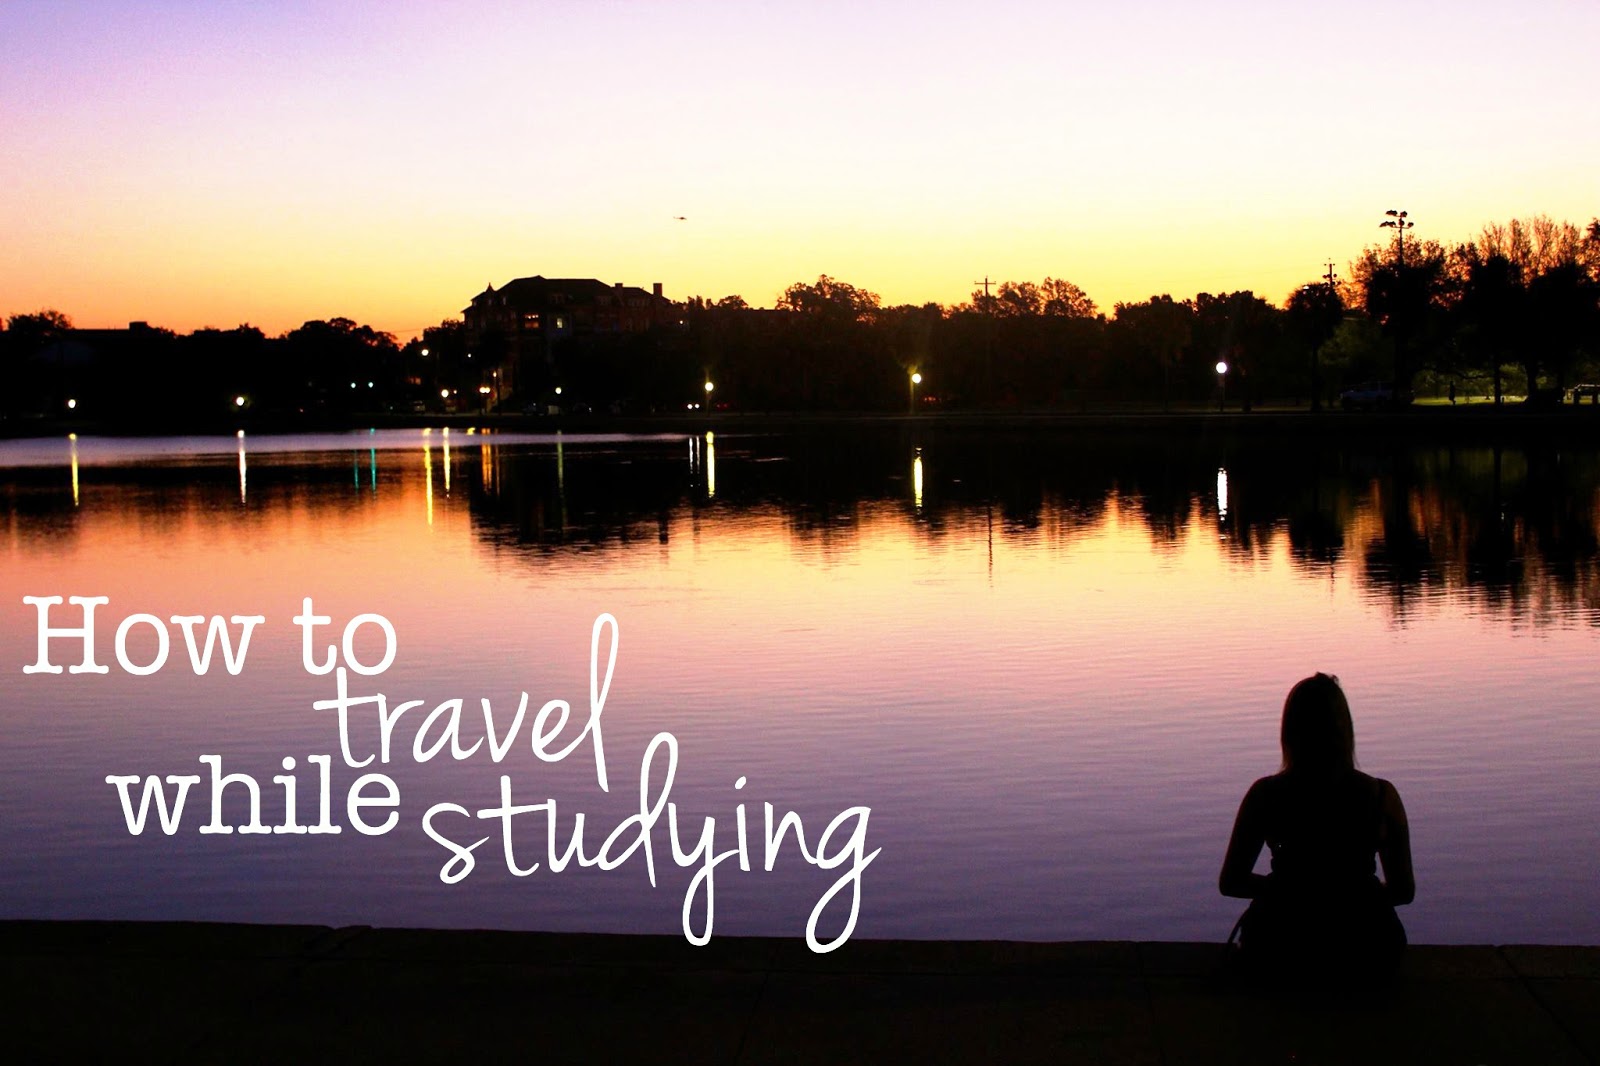 HOW TO TRAVEL WHILE STUDYING